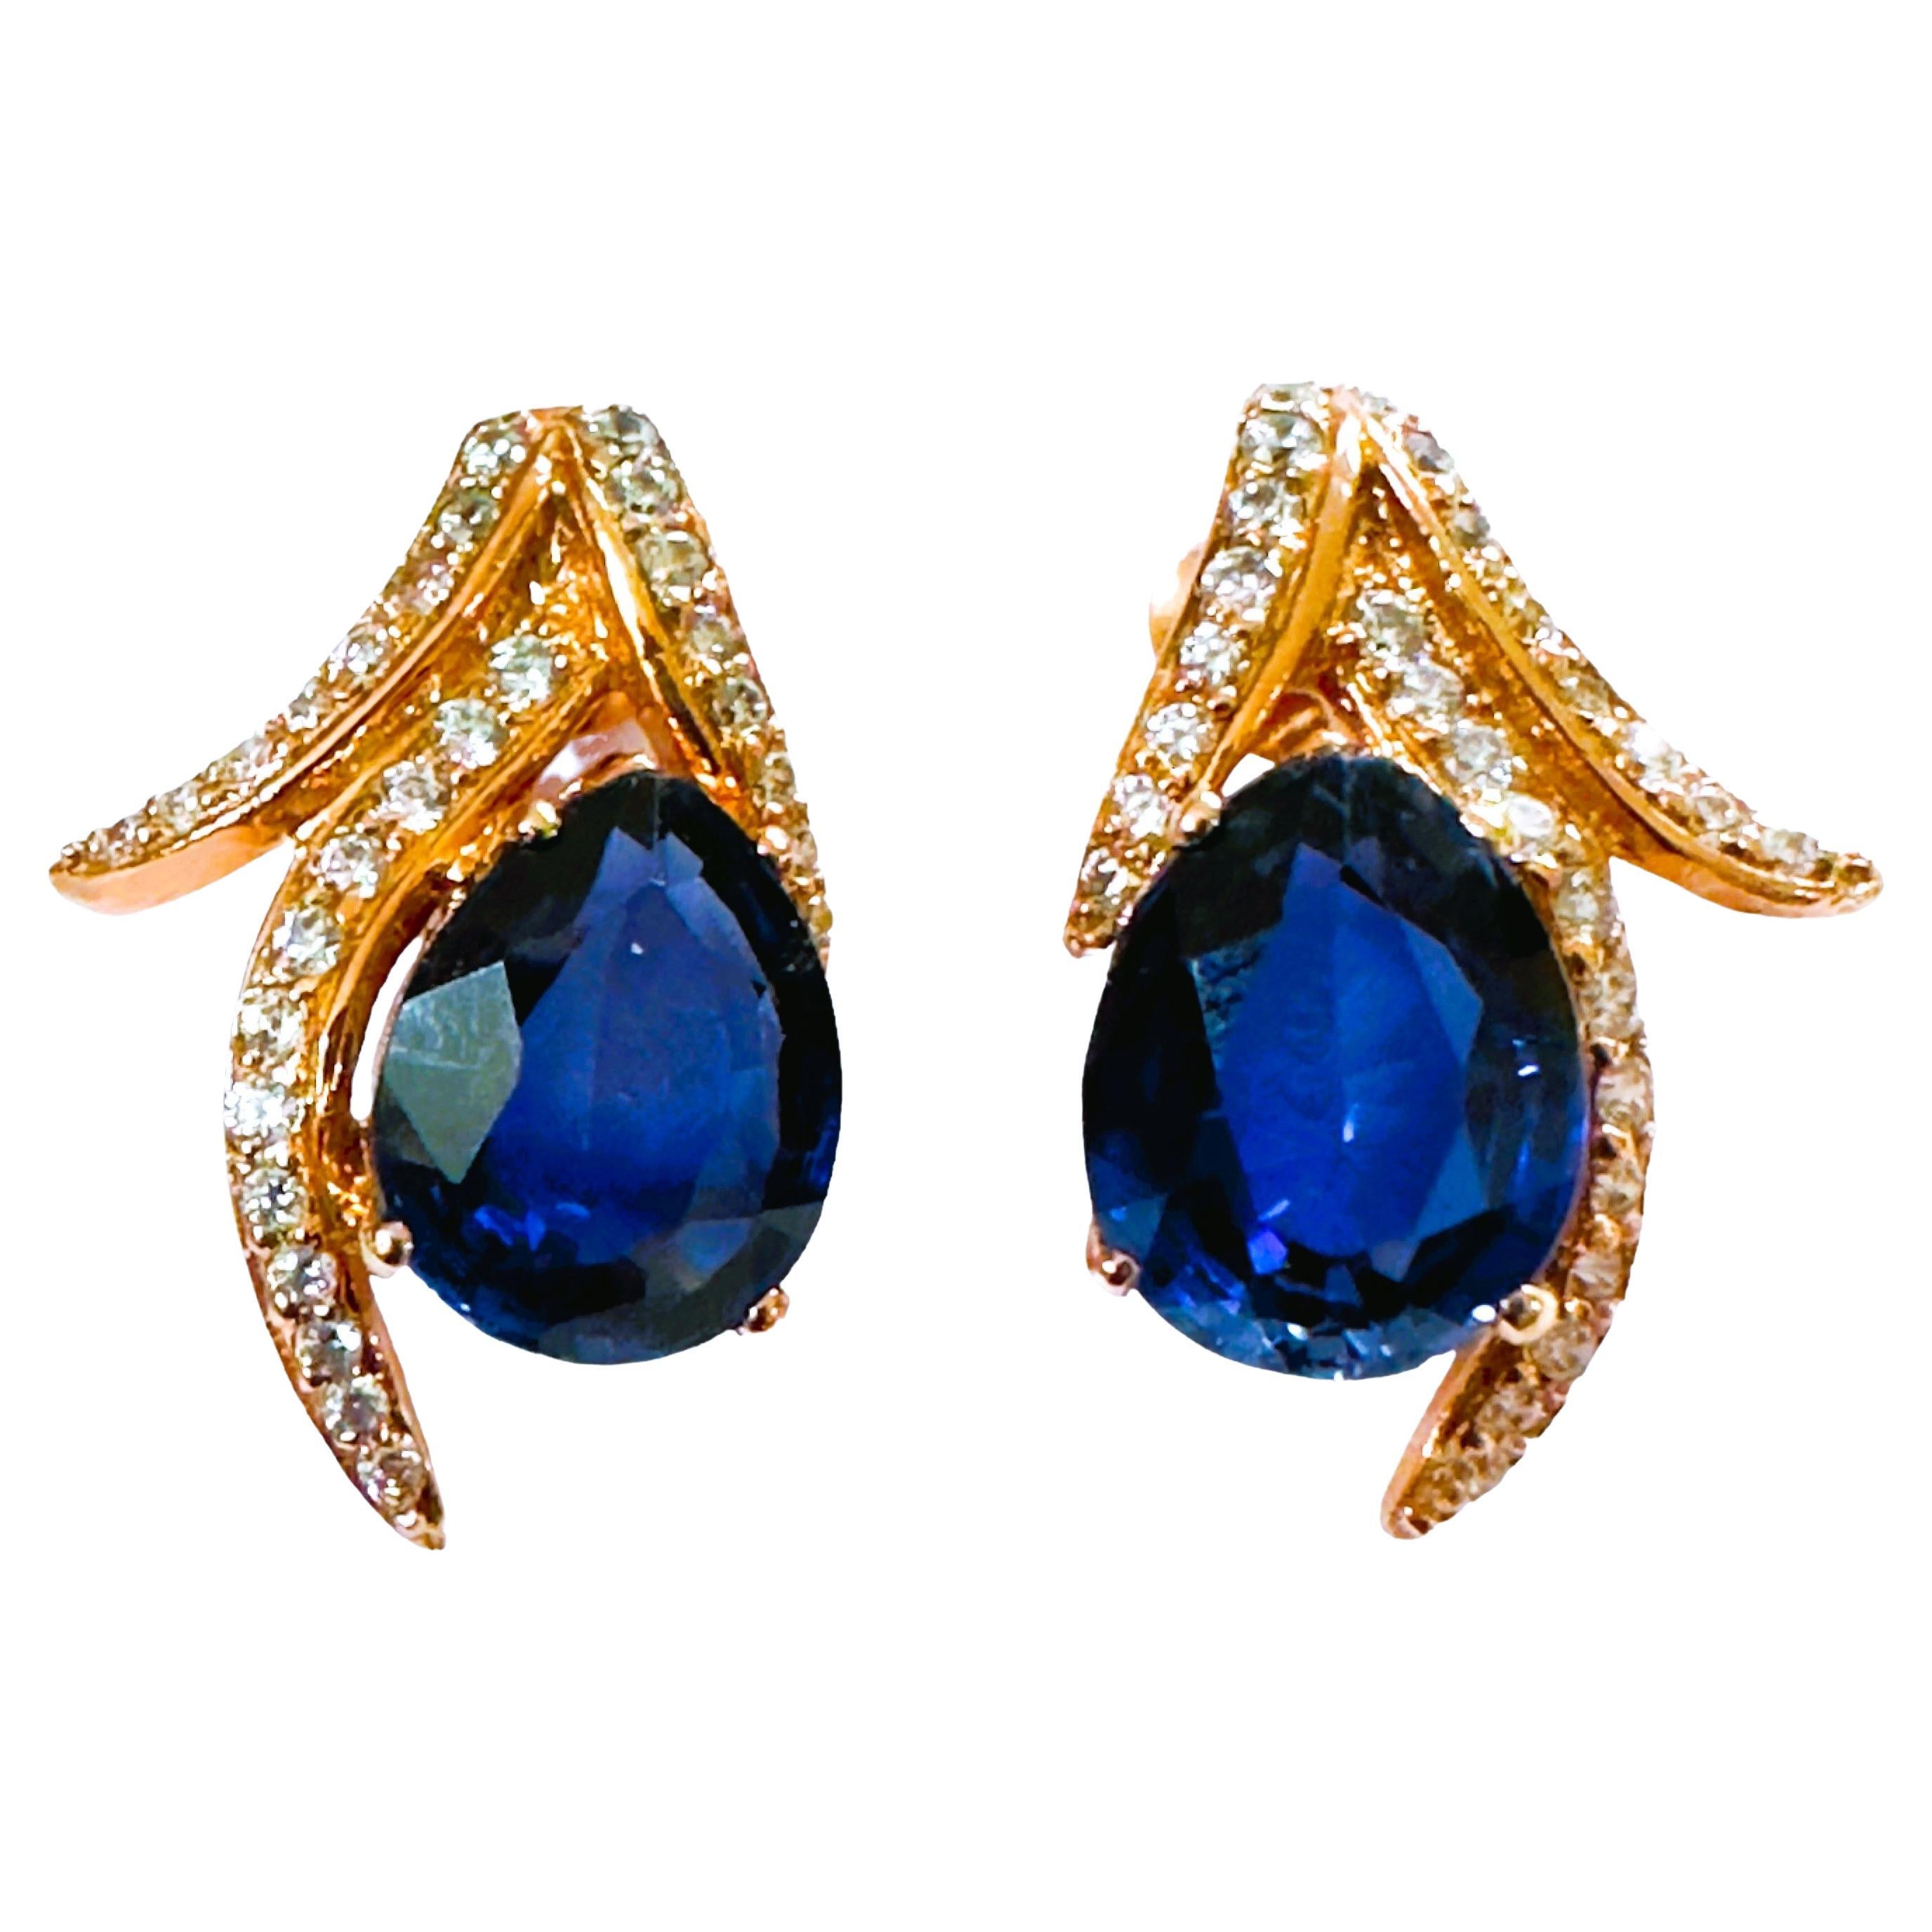 New African IF 8.4ct Dark Blue Sapphire Post RGold Plated Sterling Earrings